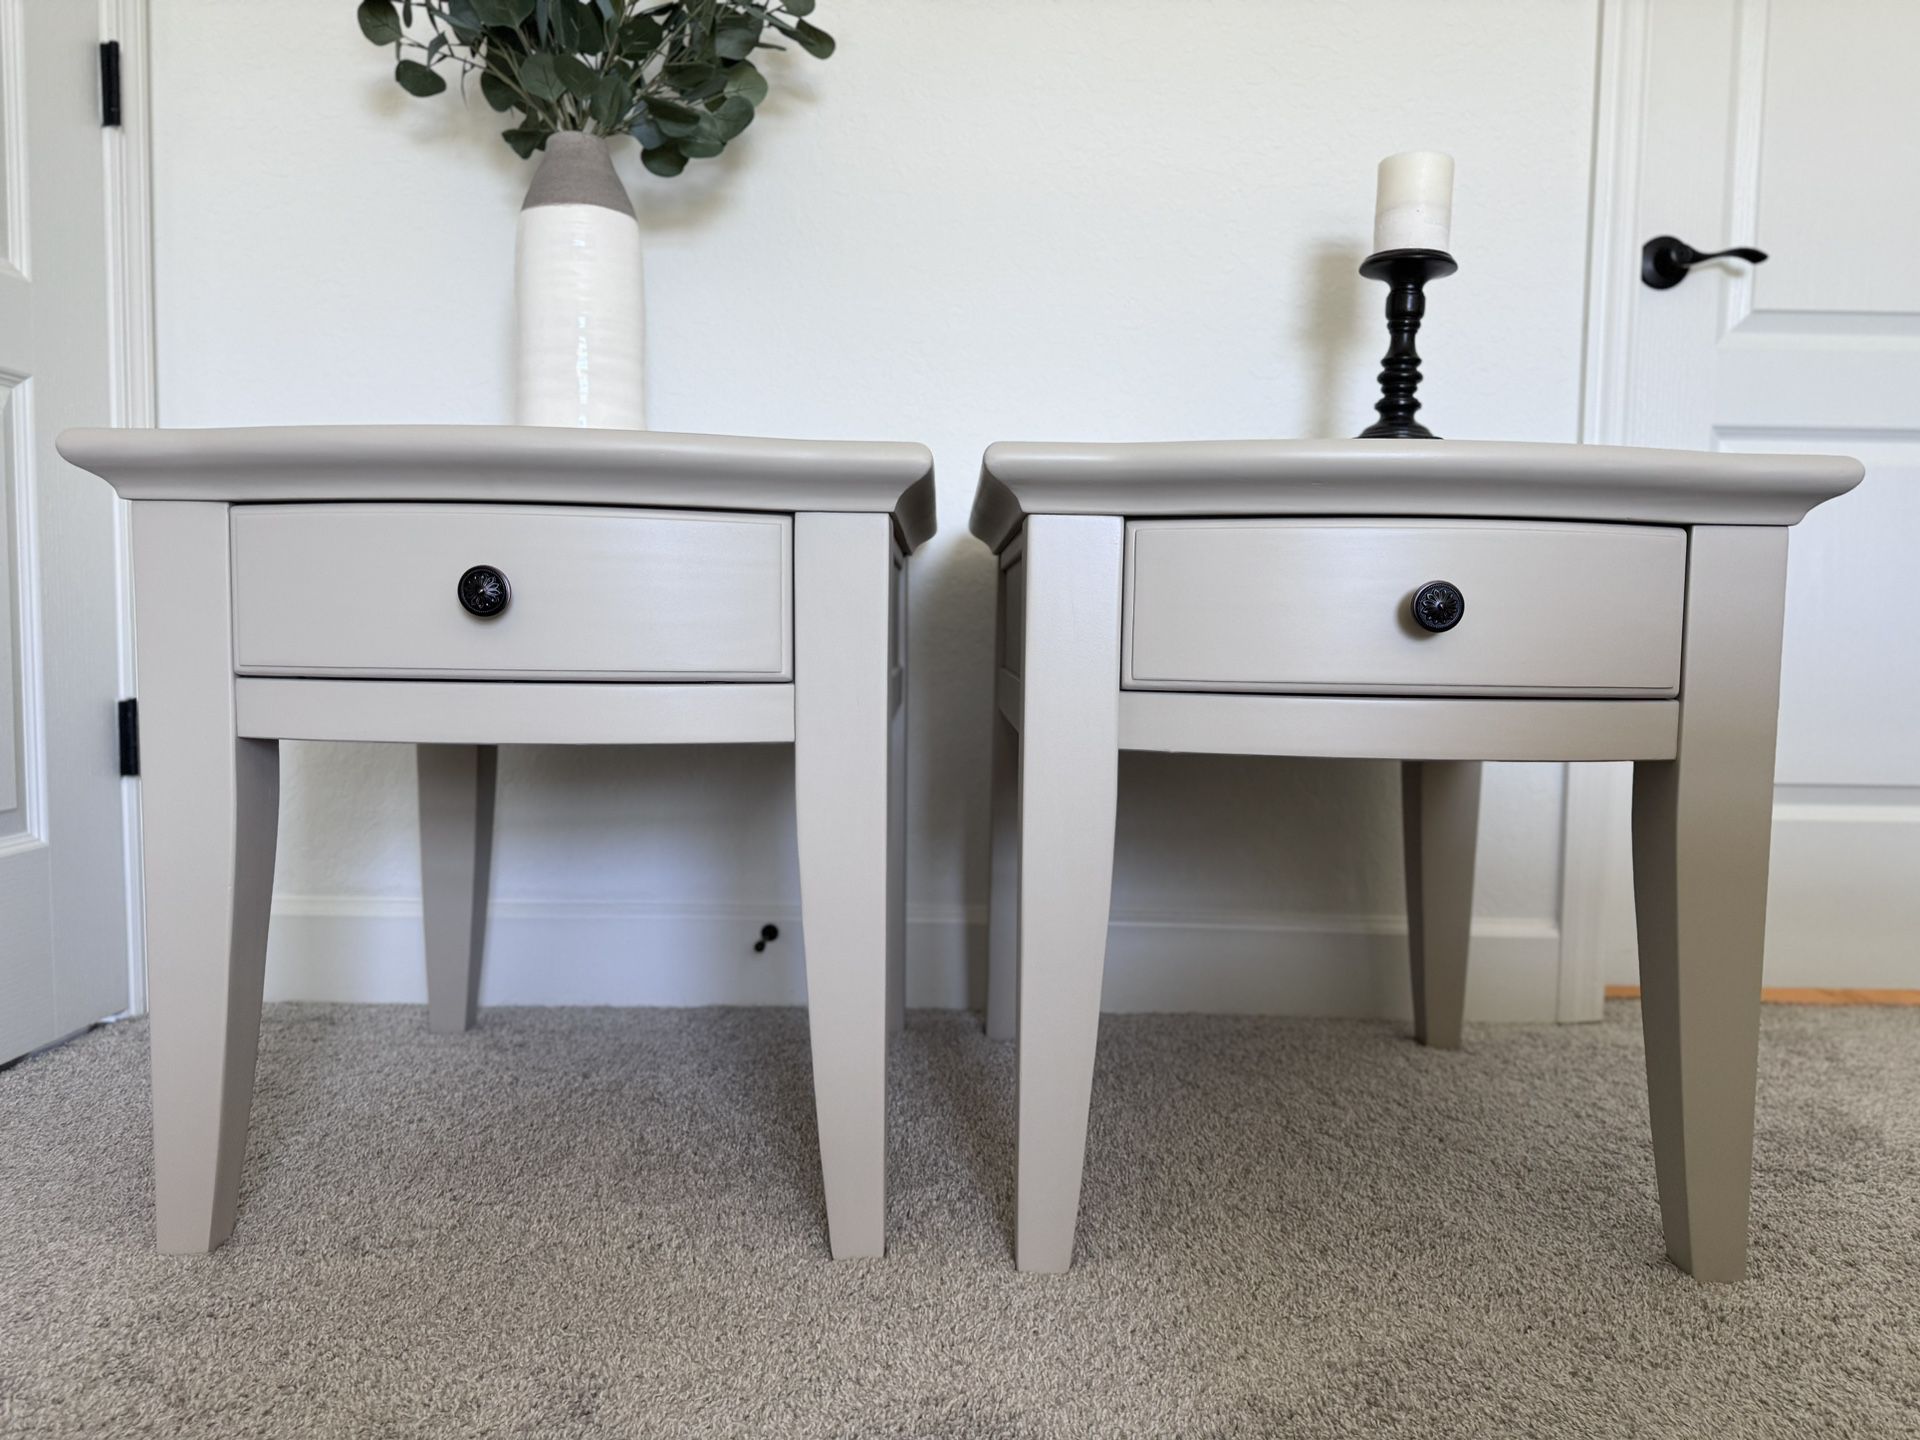 Pair Of Matching End Tables/Nightstands